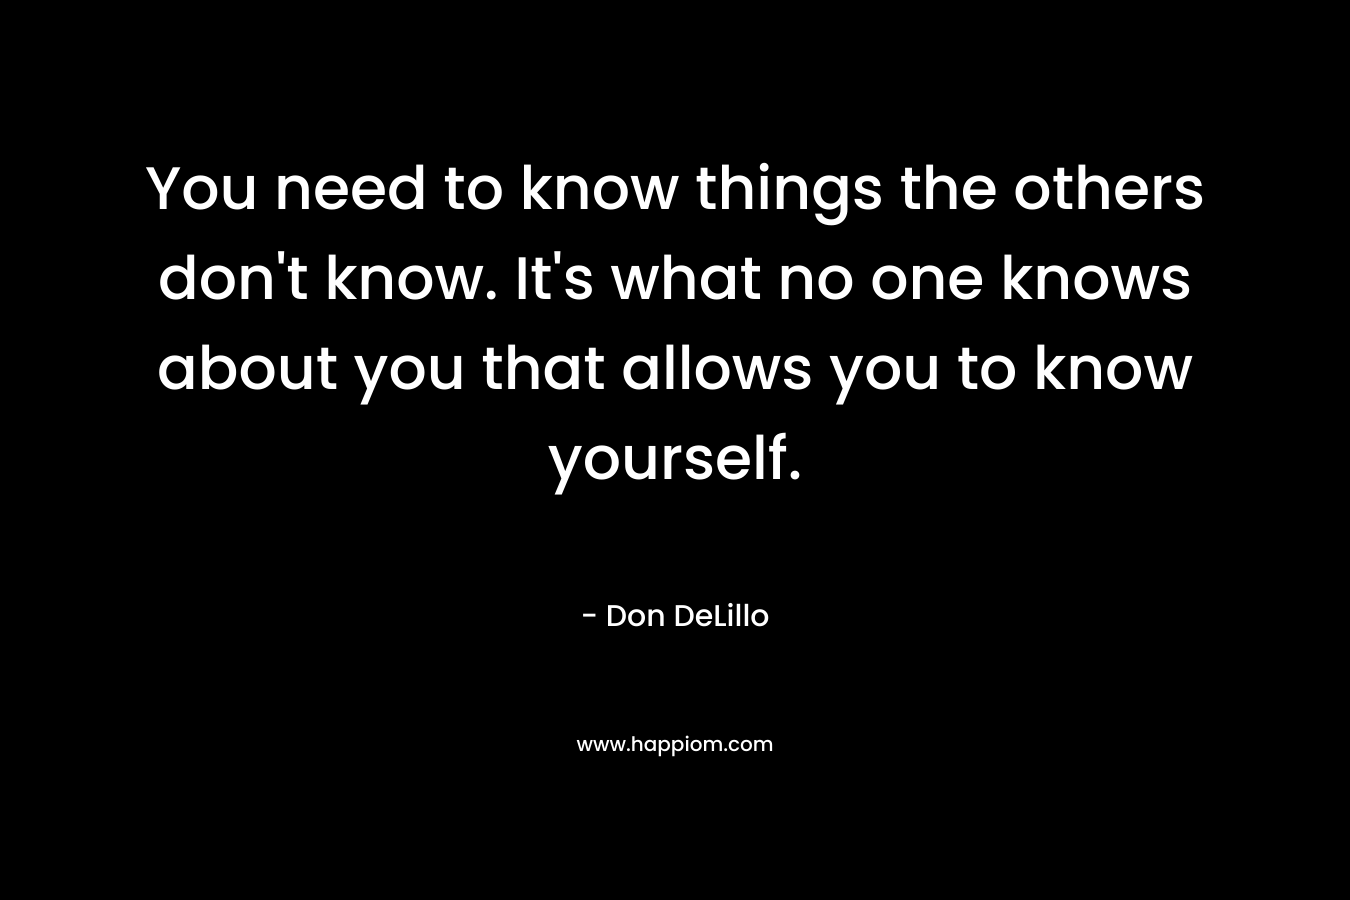 You need to know things the others don’t know. It’s what no one knows about you that allows you to know yourself. – Don DeLillo